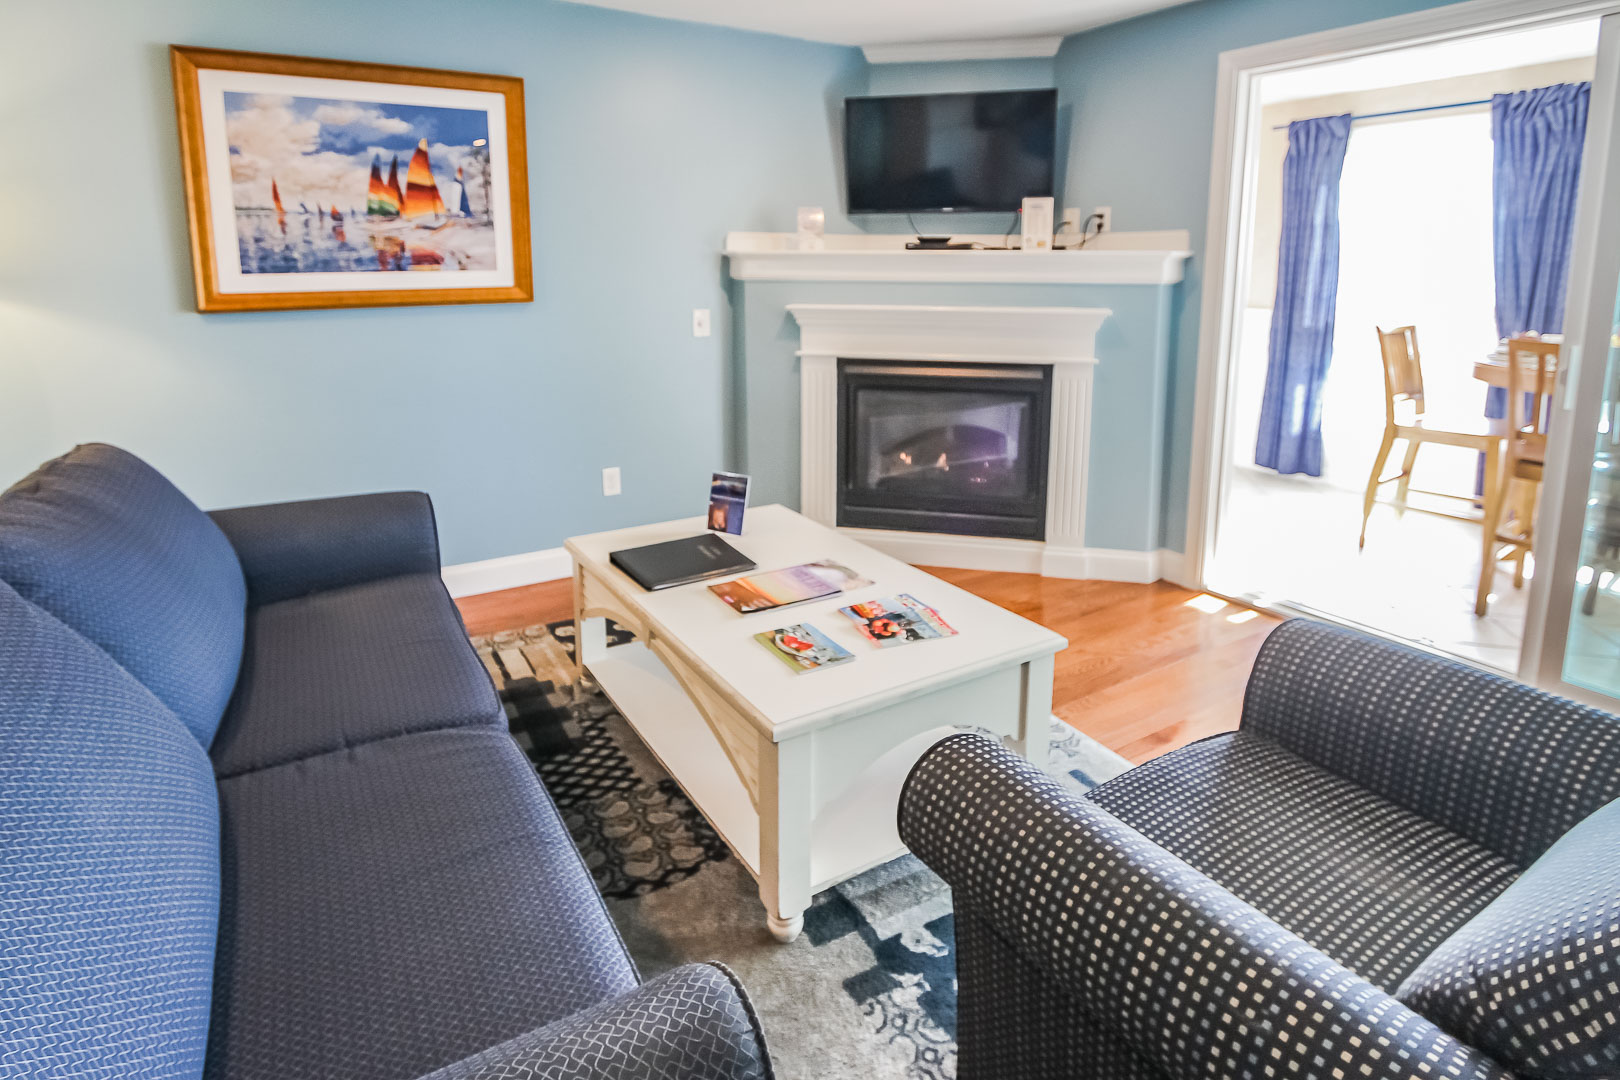 A refreshing living room area with a kitchenette at VRI's Edgewater Beach Resort in Massachusetts.